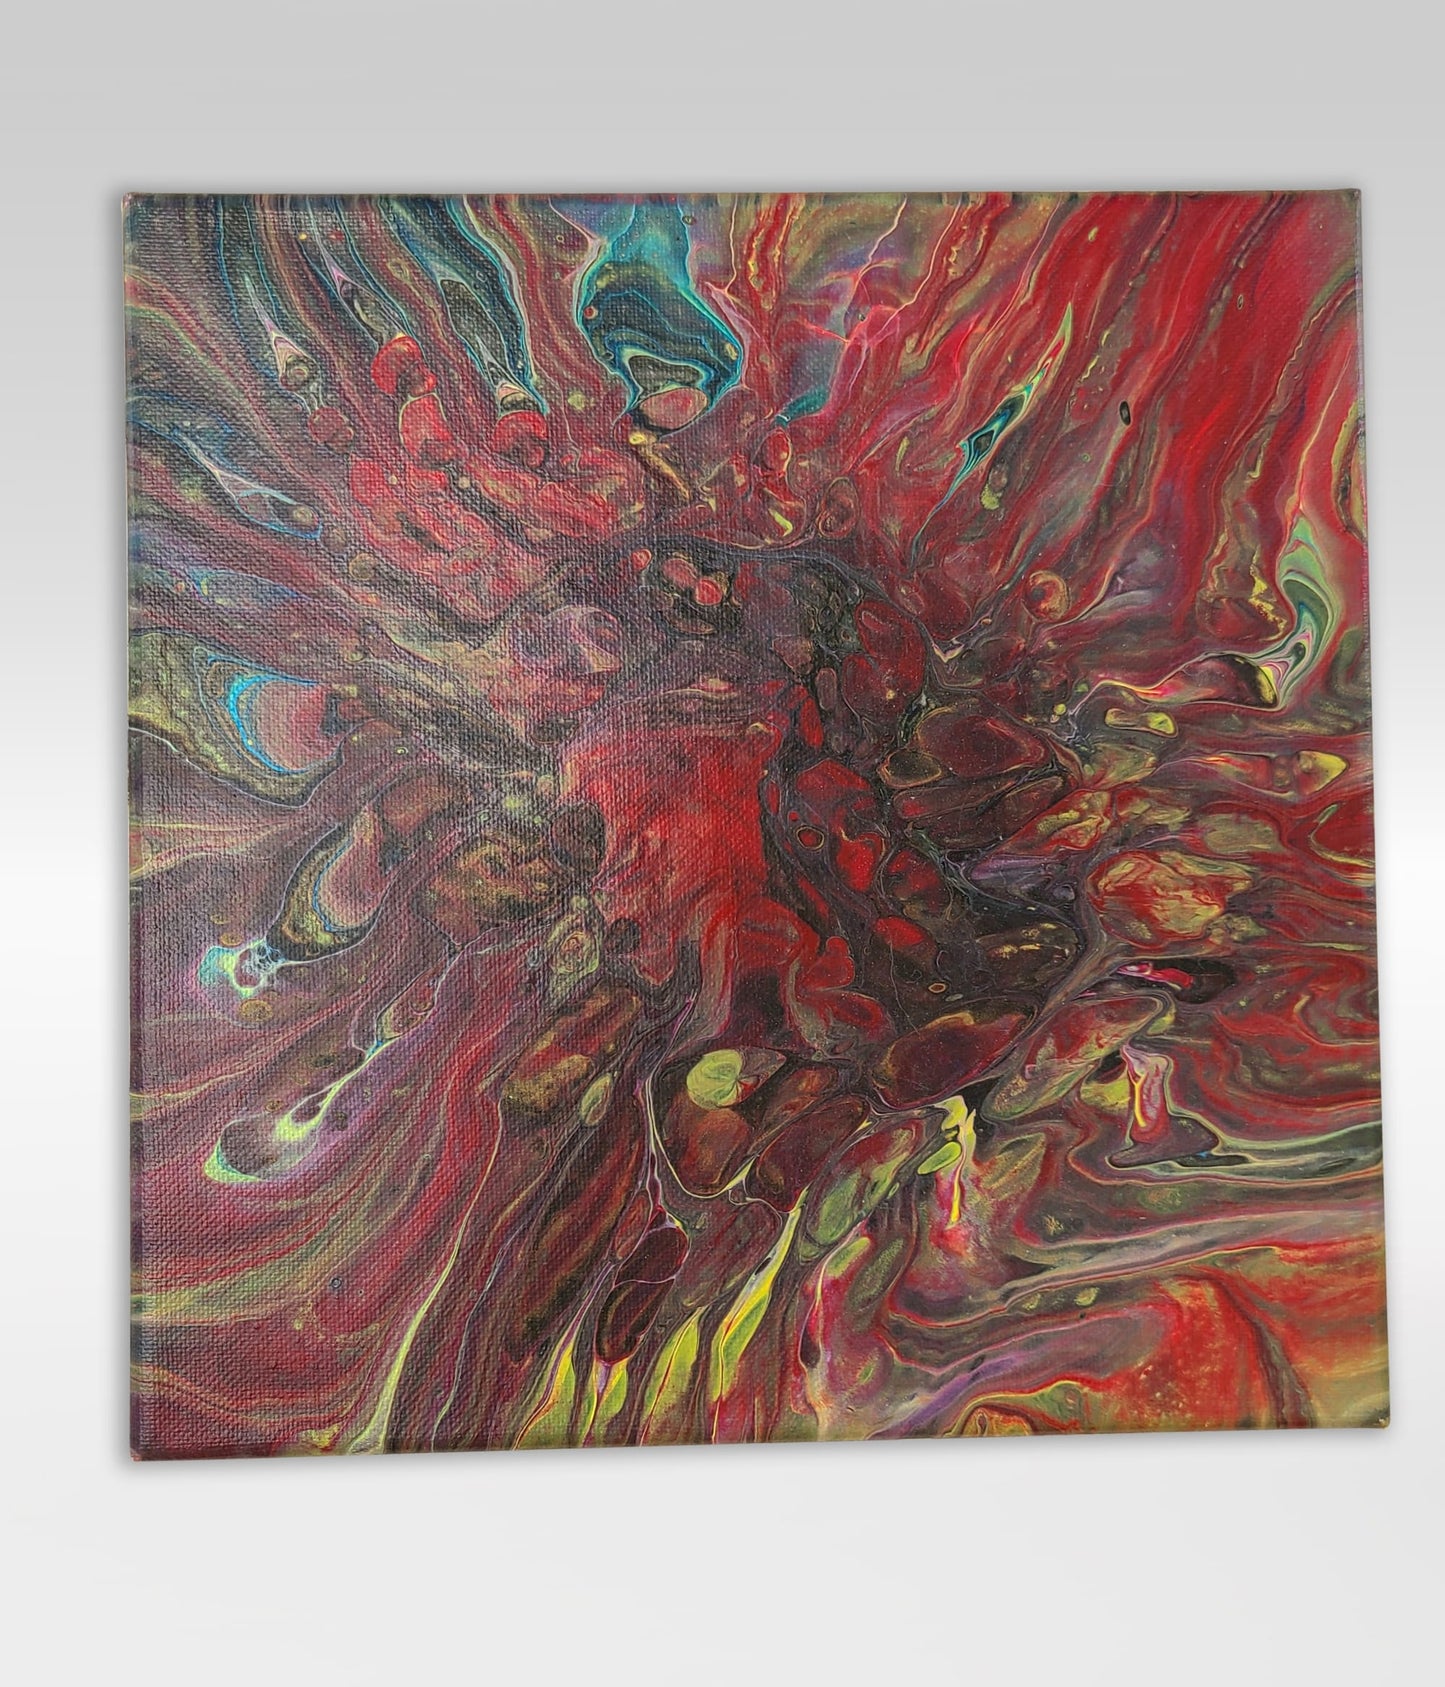 Get Over Here! – 10 x 10 Acrylic Pour Painting On Canvas